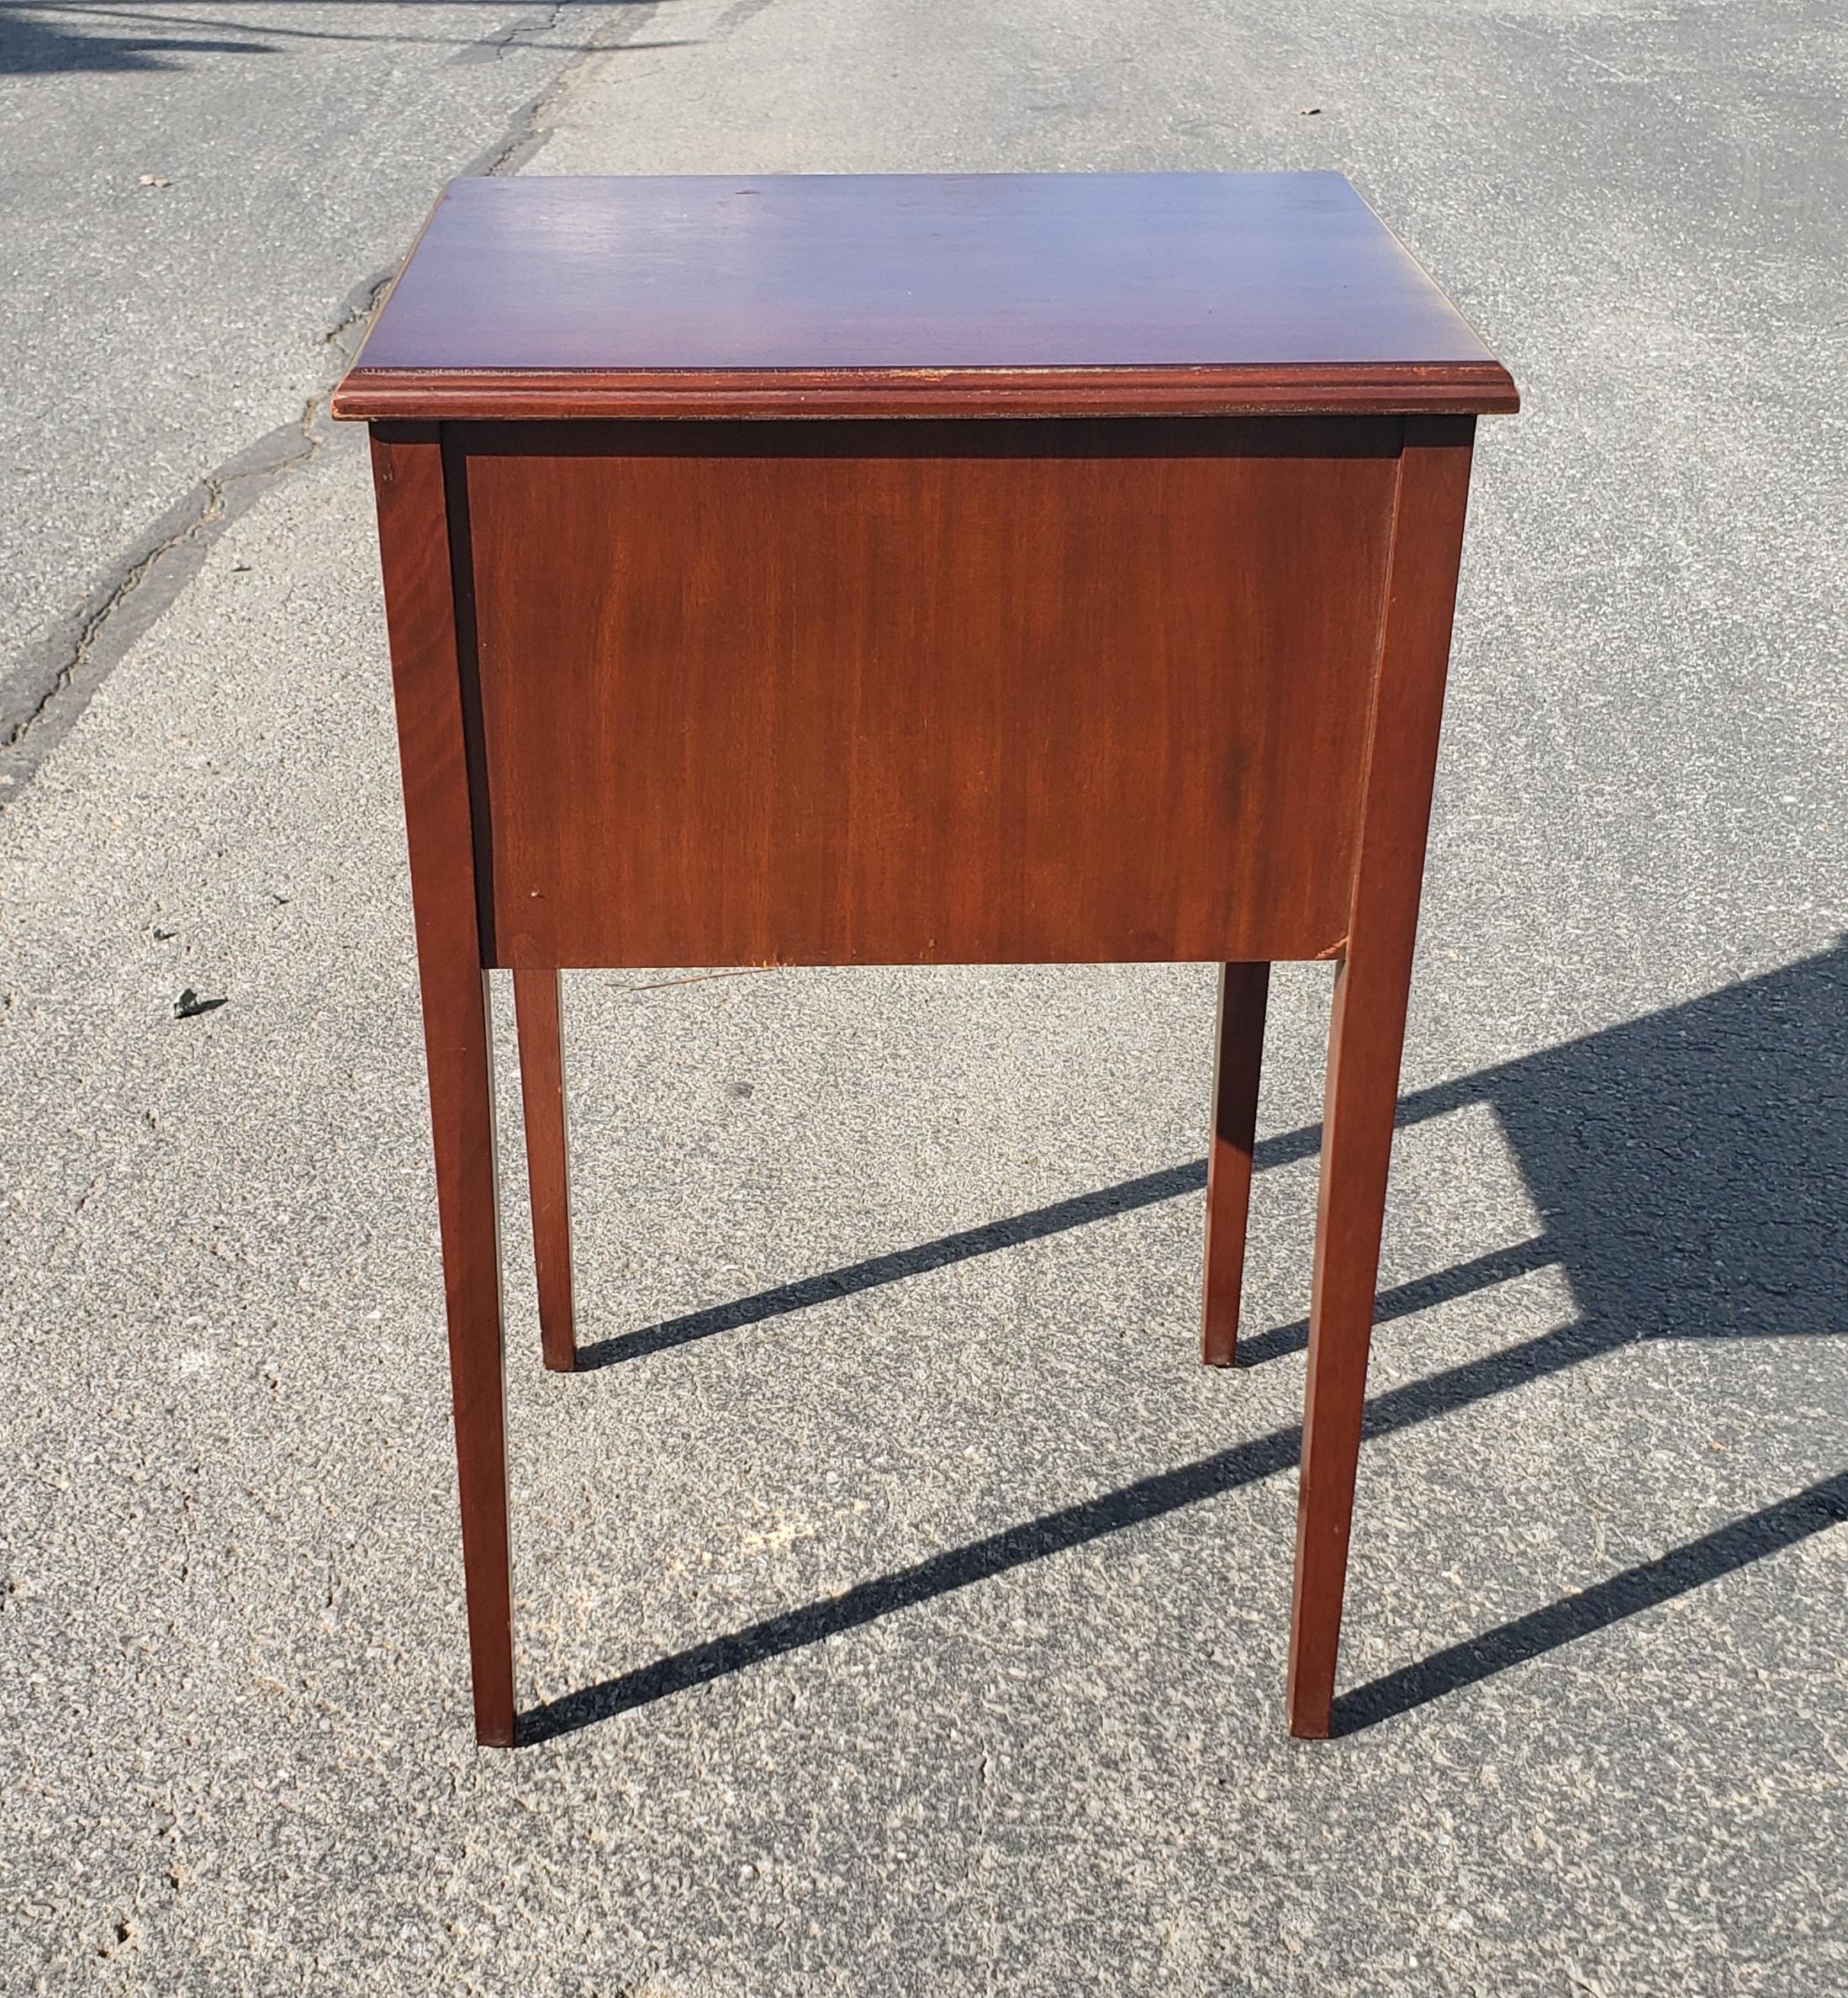 1940s Regency Two-Drawers Mahogany Side Tables by Mersman Furniture, a Pair In Good Condition For Sale In Germantown, MD